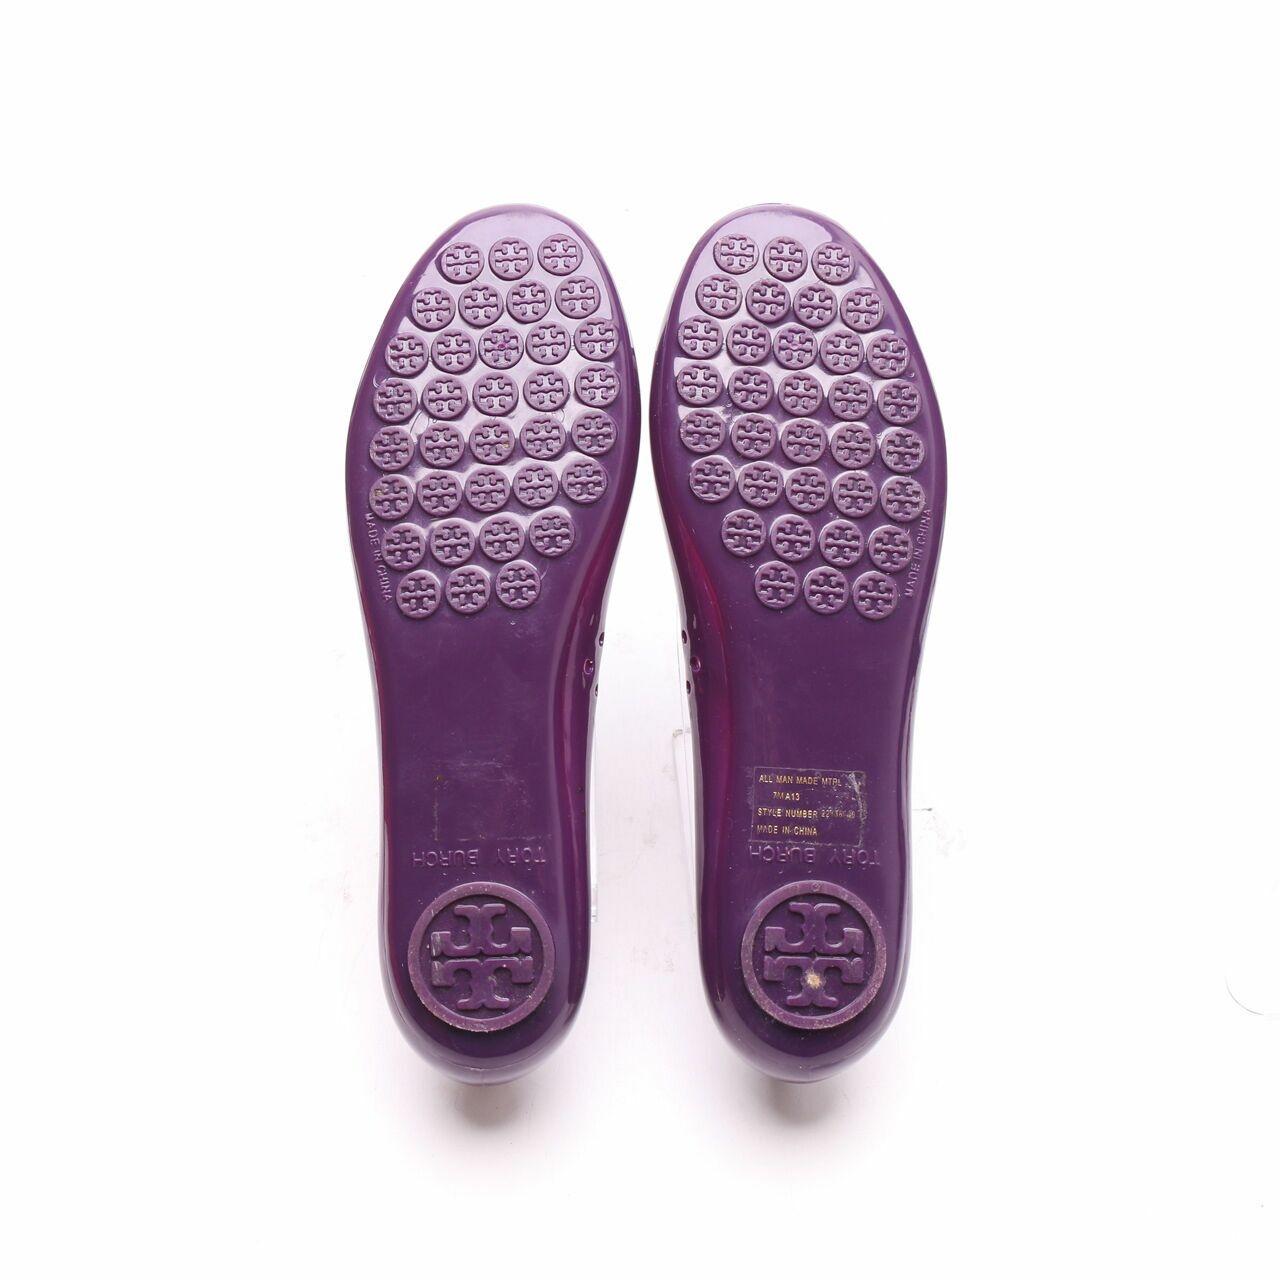 Tory Burch Jelly Ballet with Bow Sweet Plum Purple Flats Shoes